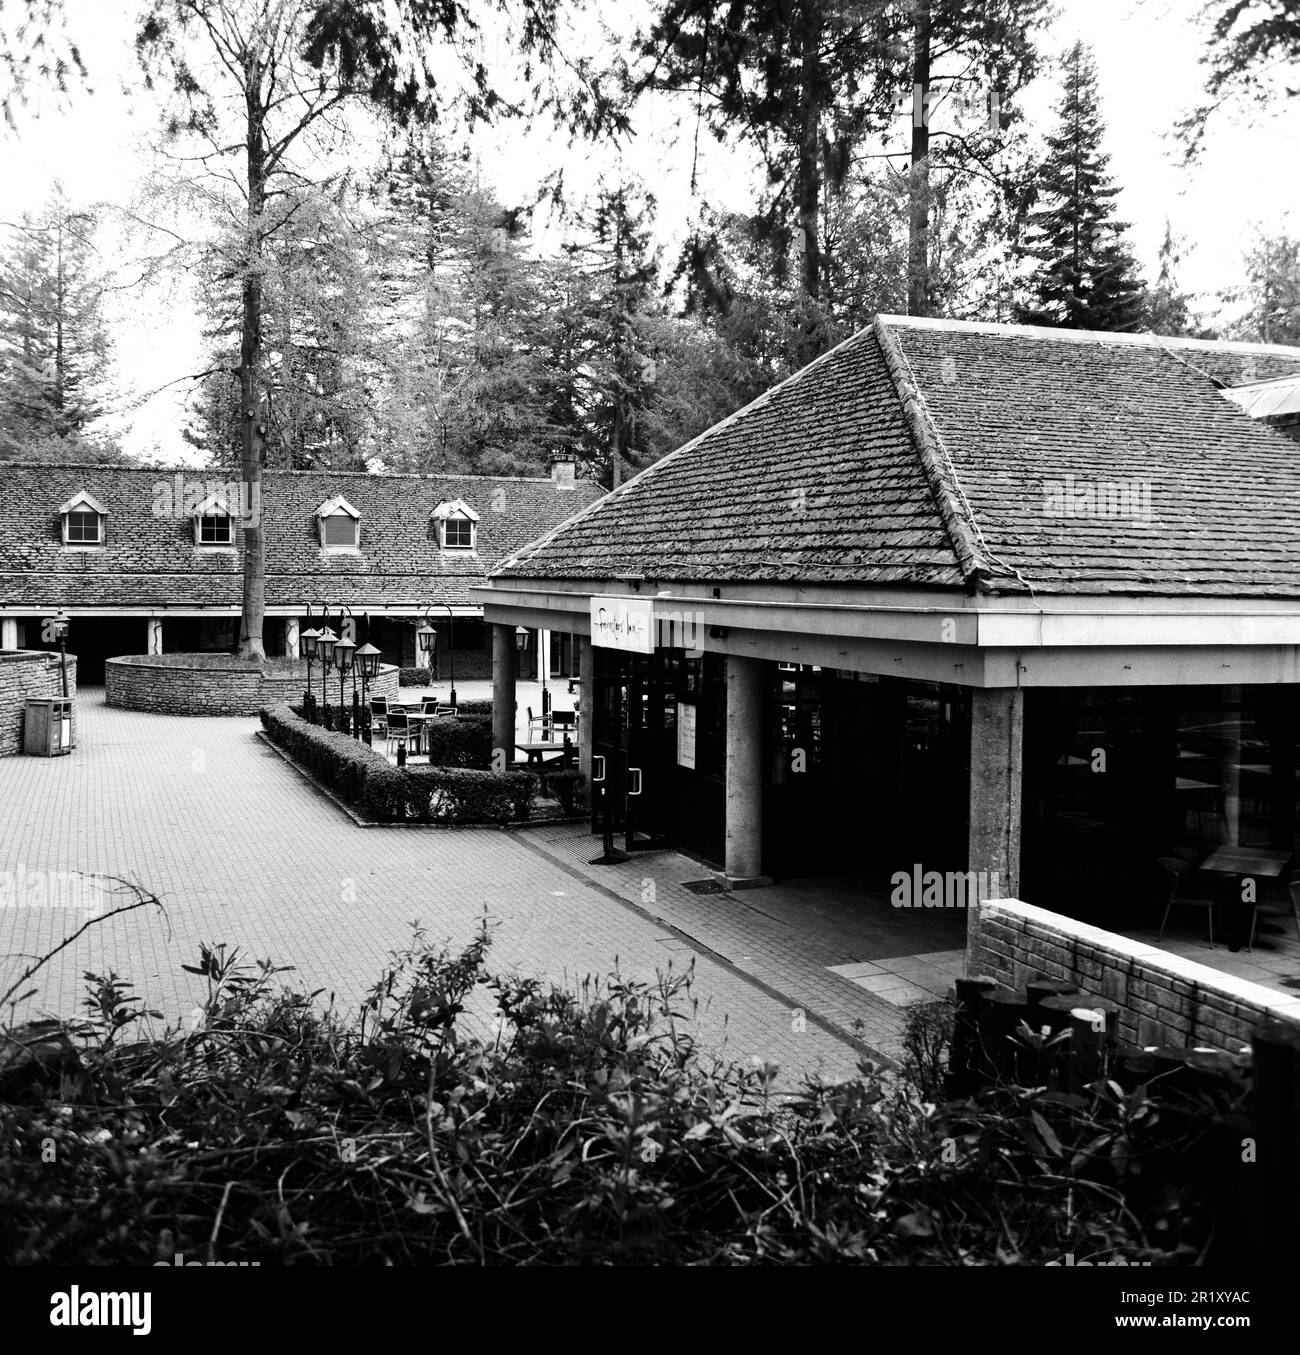 Foresters' Inn, Centre Parcs, Longleat, Wiltshire, Angleterre, Royaume-Uni Banque D'Images